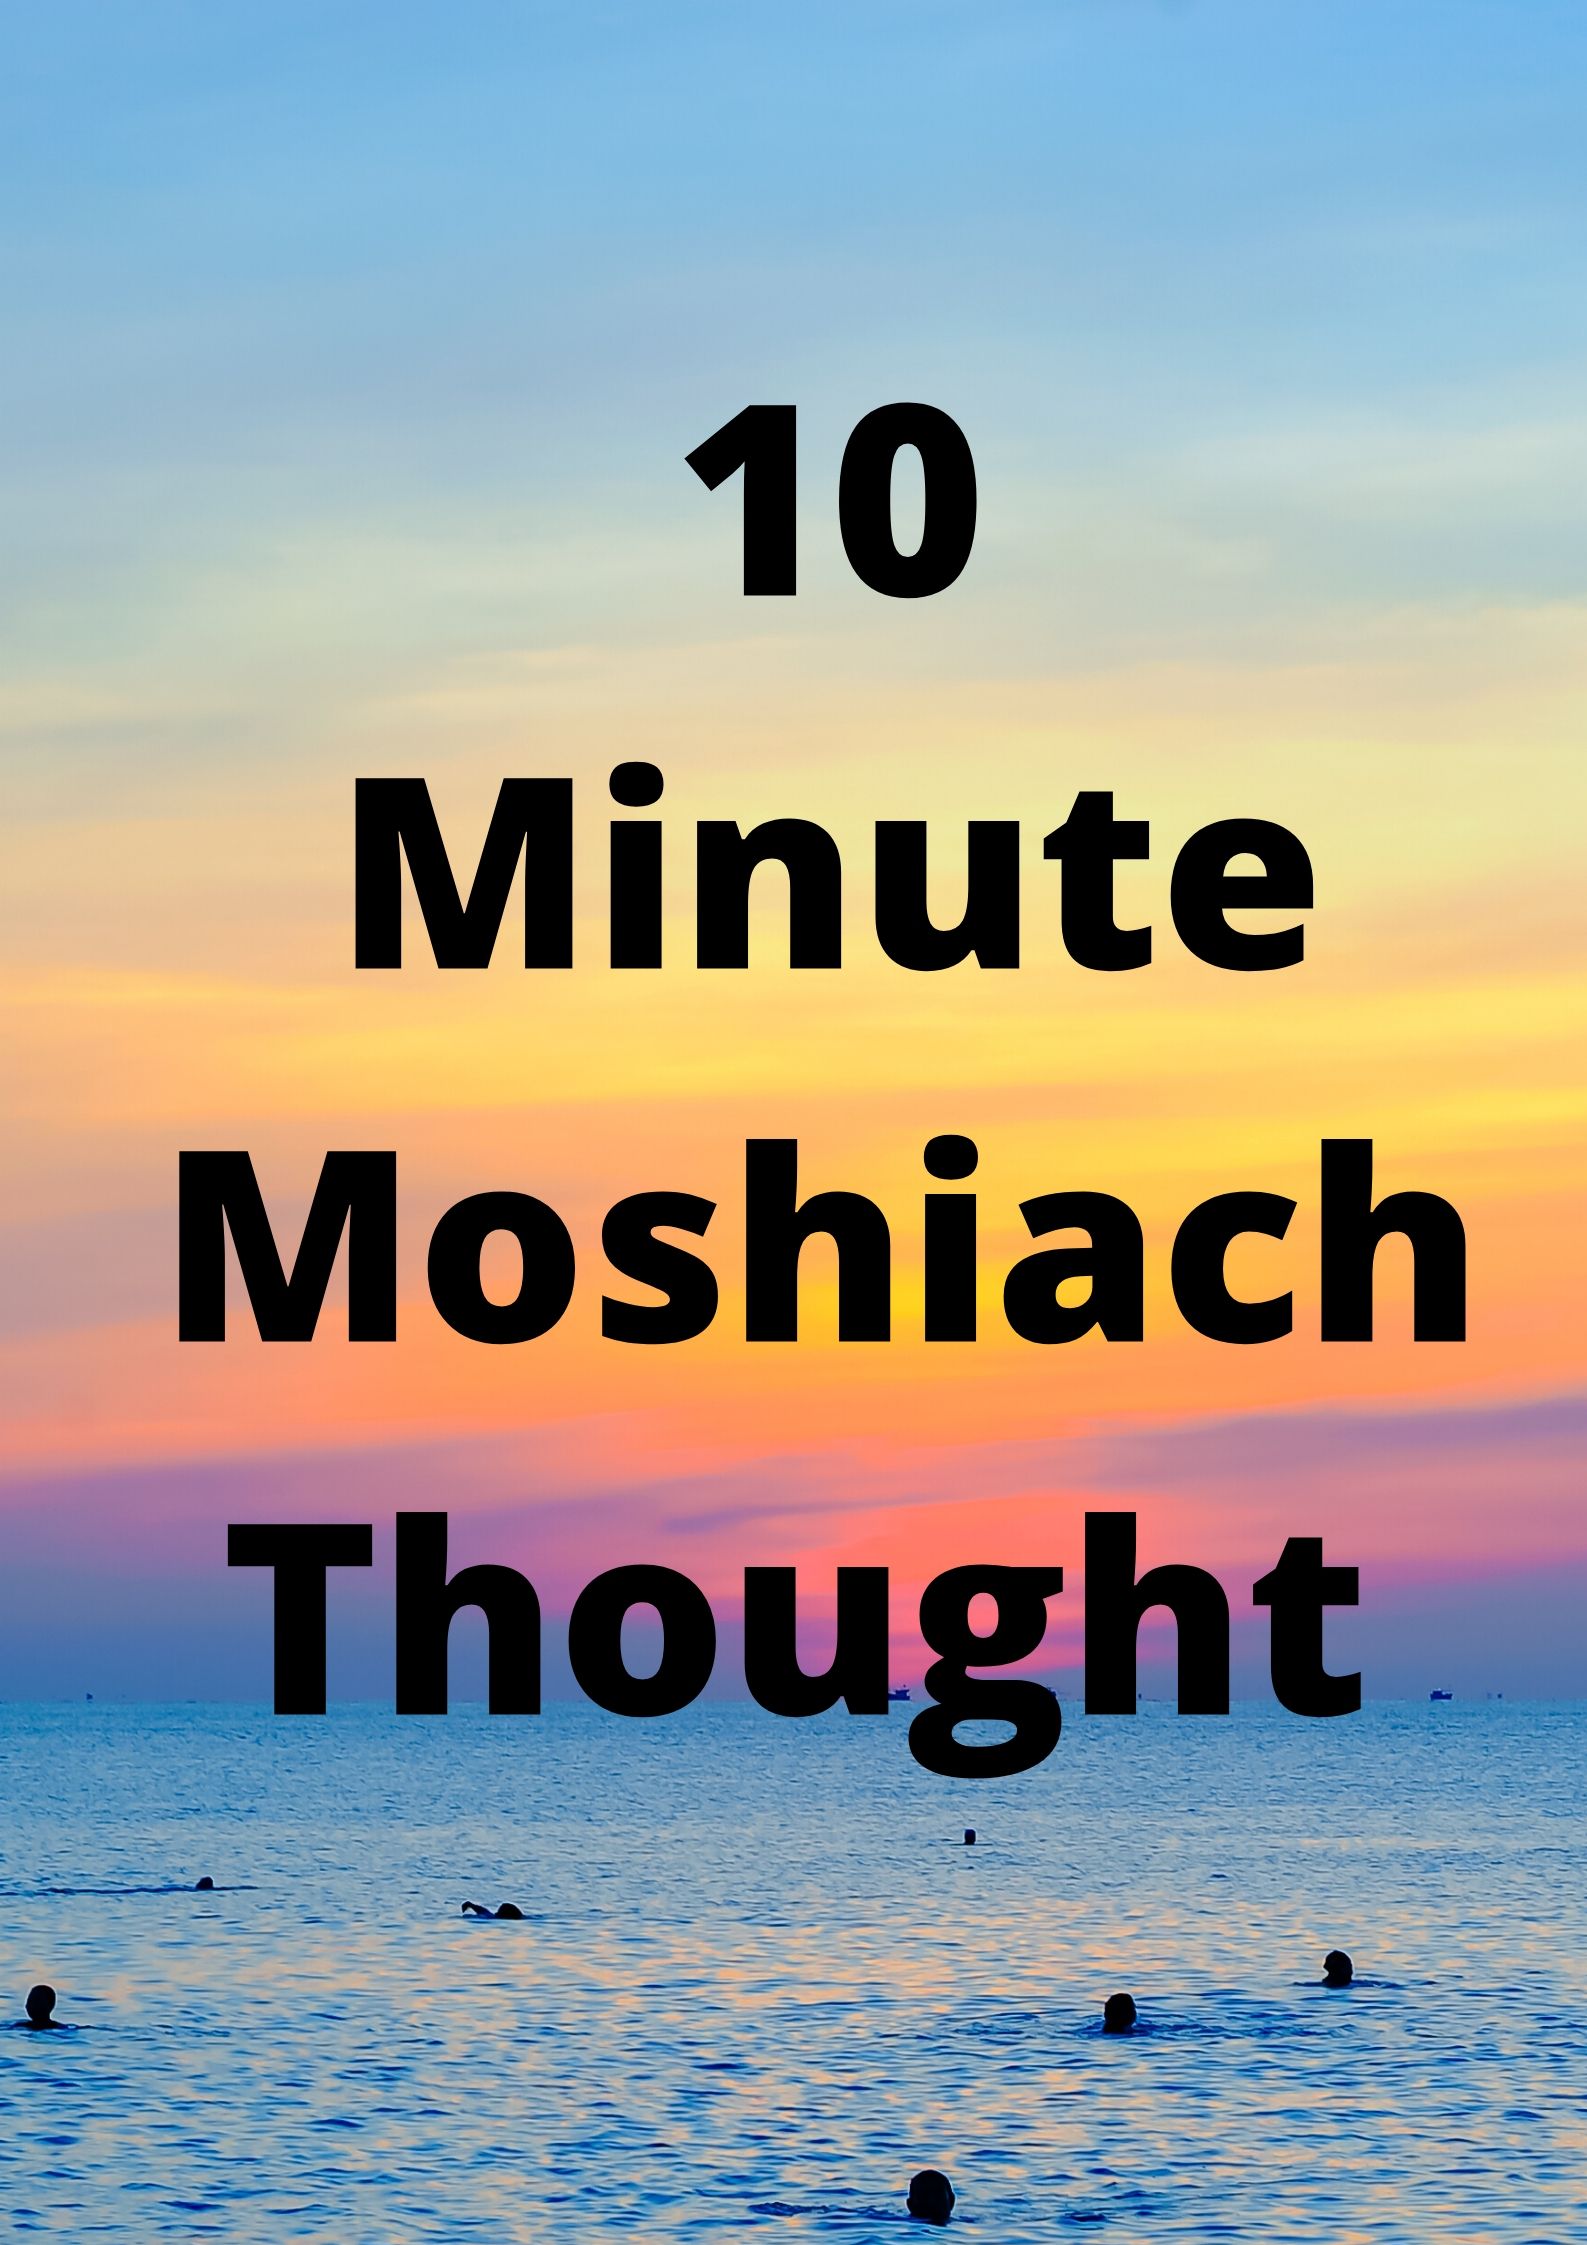 10 Minute Moshiach Thought